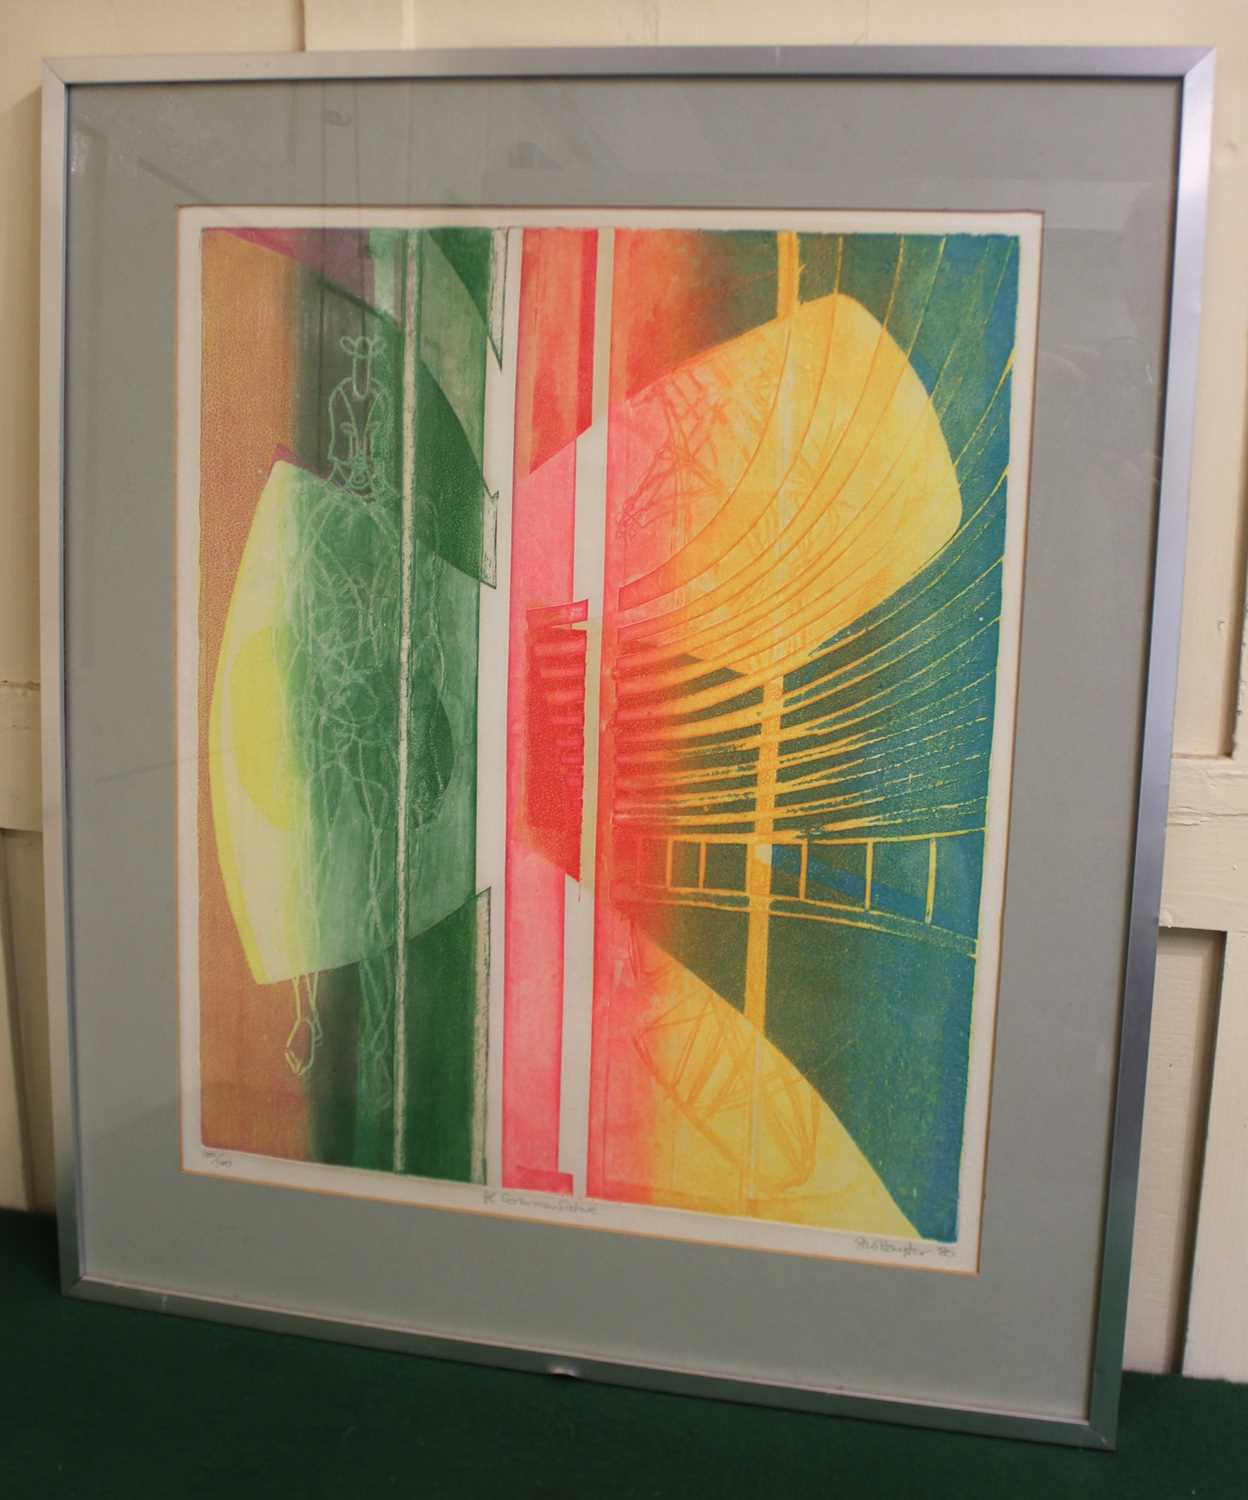 Y Stanley William Hayter CBE (1901-1988) 'Il Commendatore' the character from the opera, Don